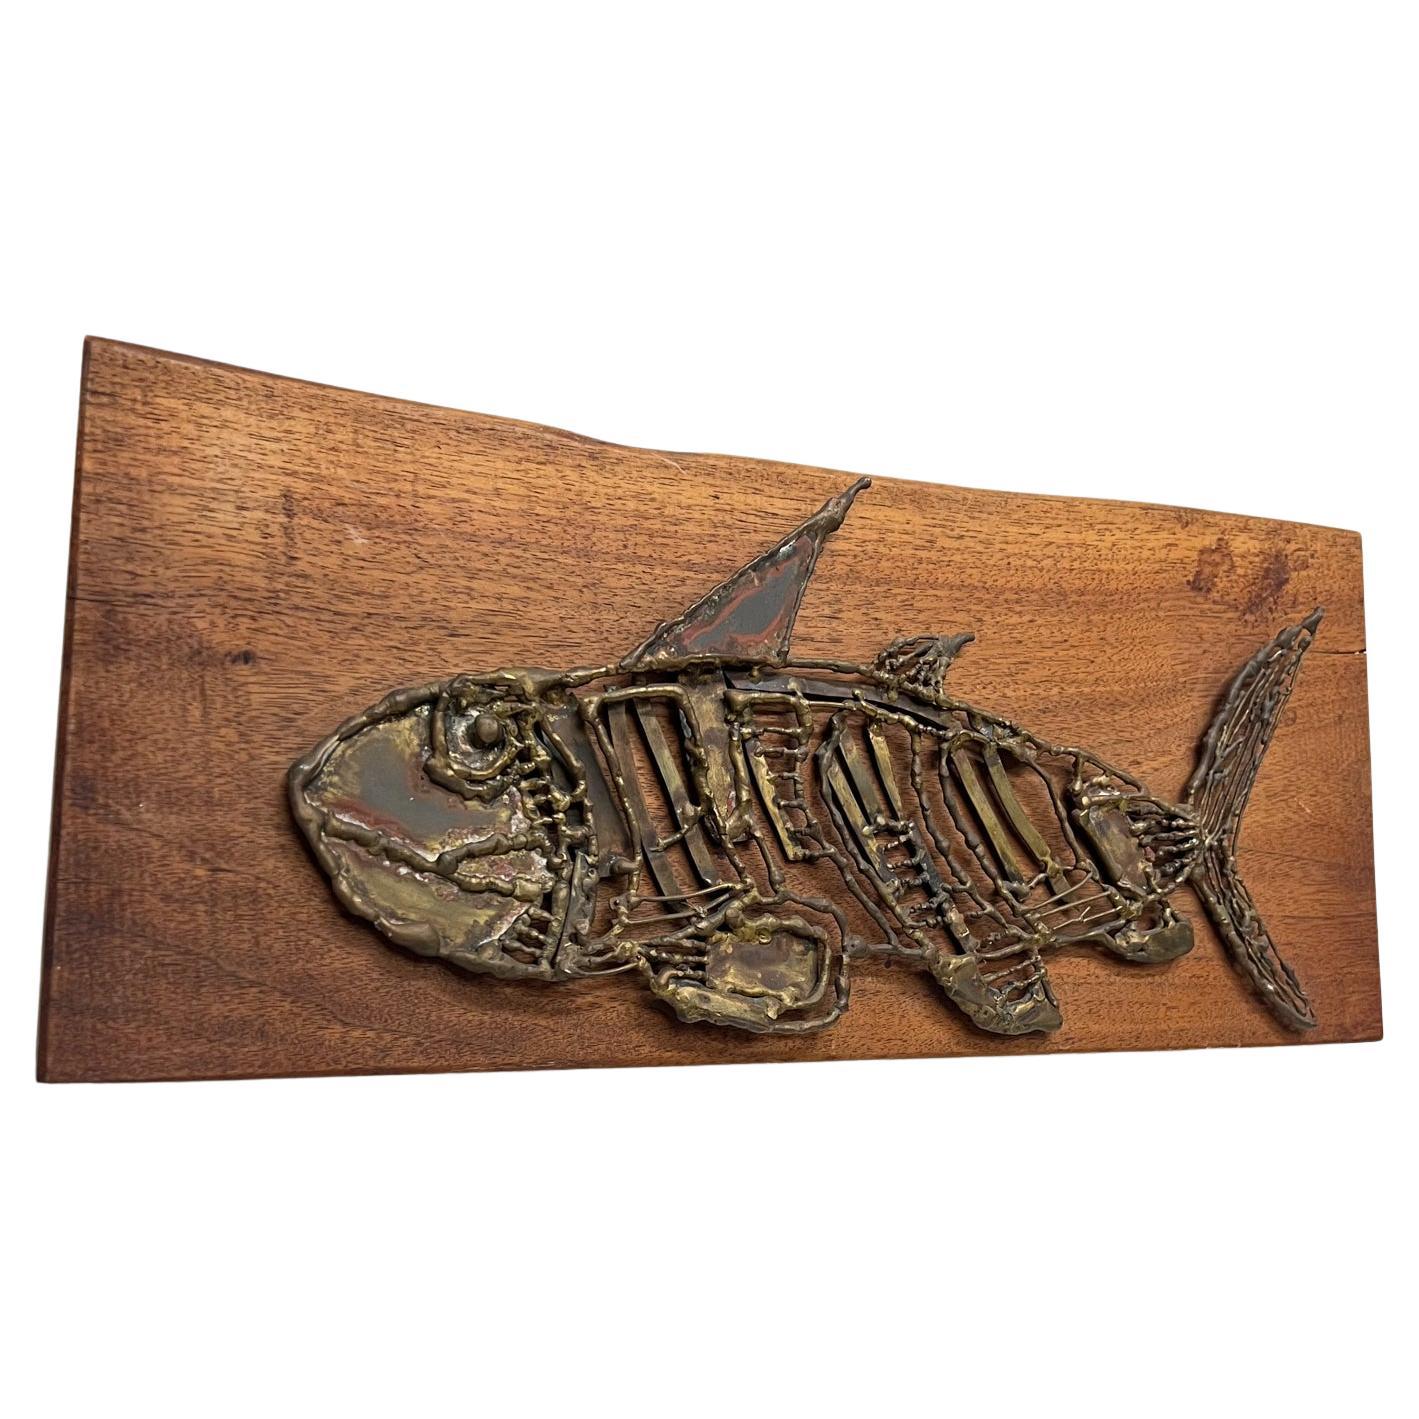 1970s Modern Brutalist Wall Art Bronzed Metal Fish on Wood Plaque For Sale